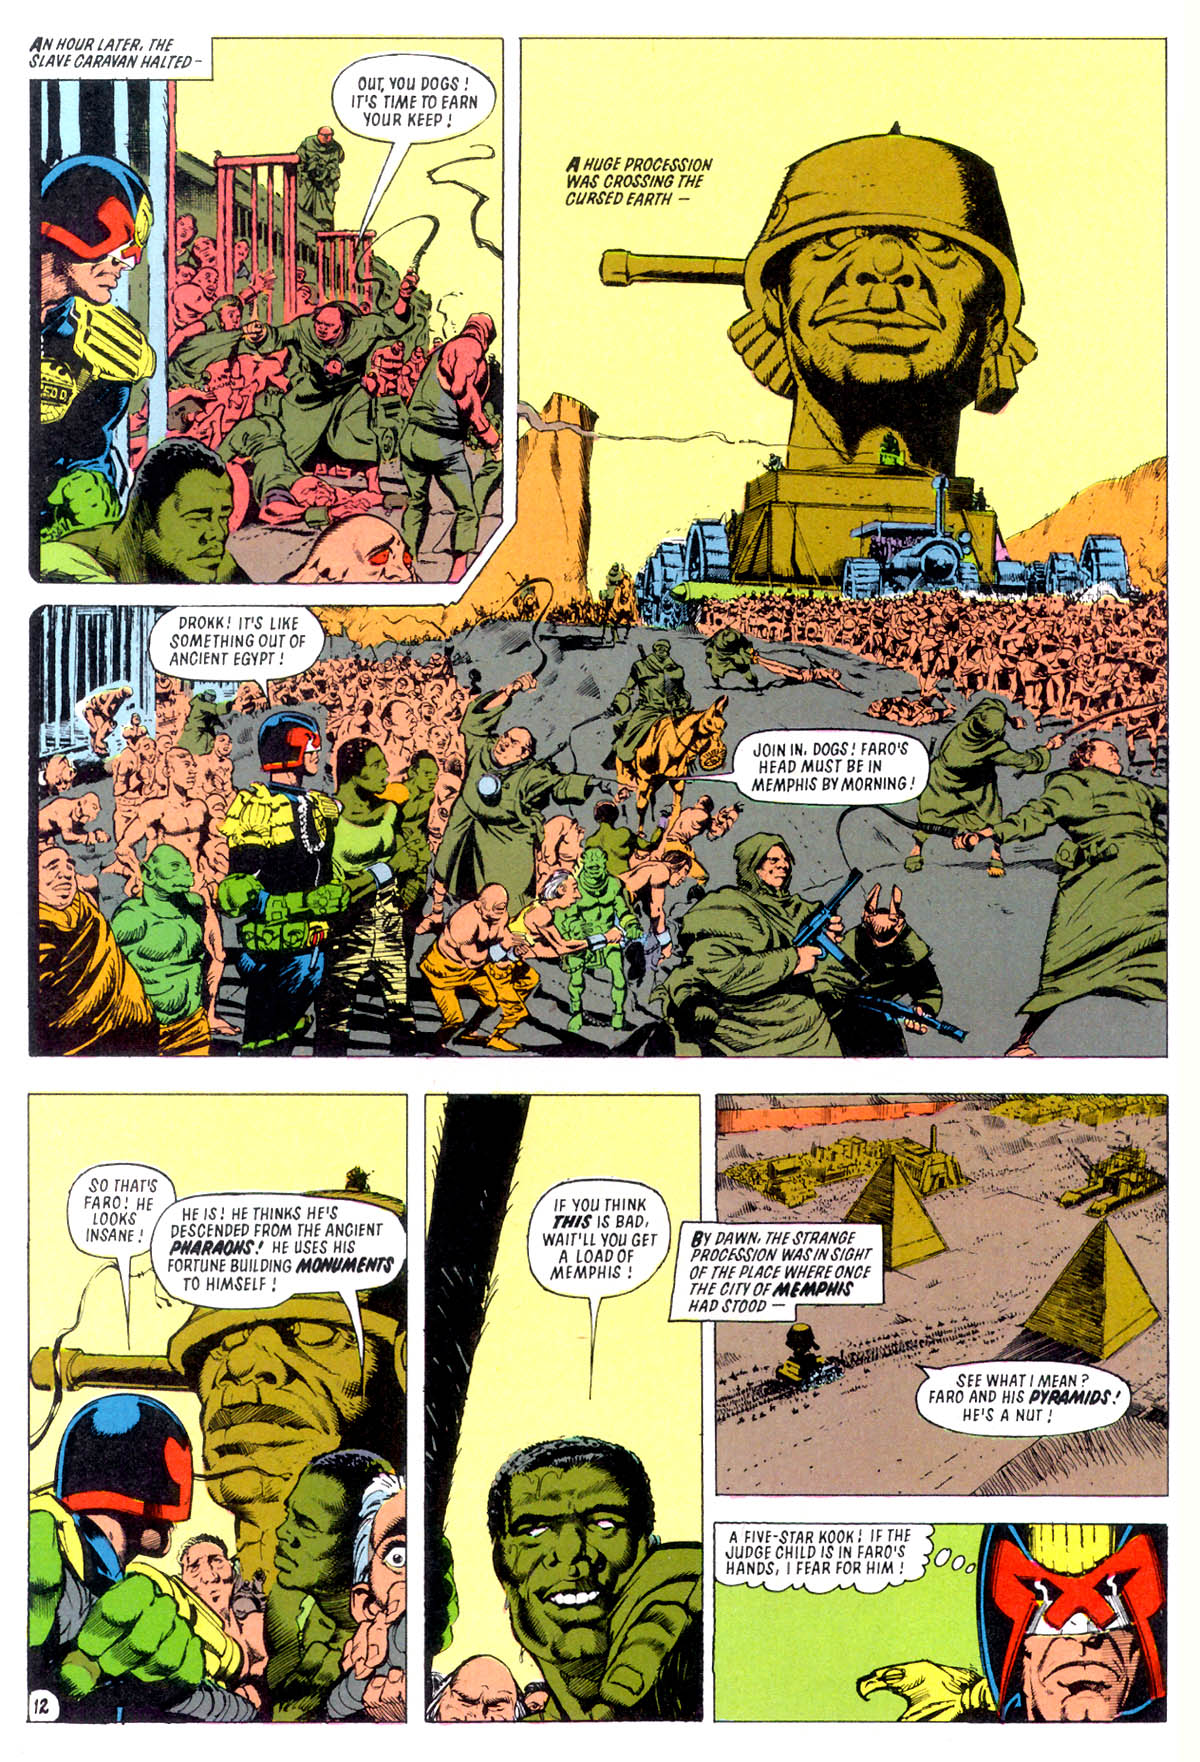 Read online Judge Dredd: The Complete Case Files comic -  Issue # TPB 4 - 13